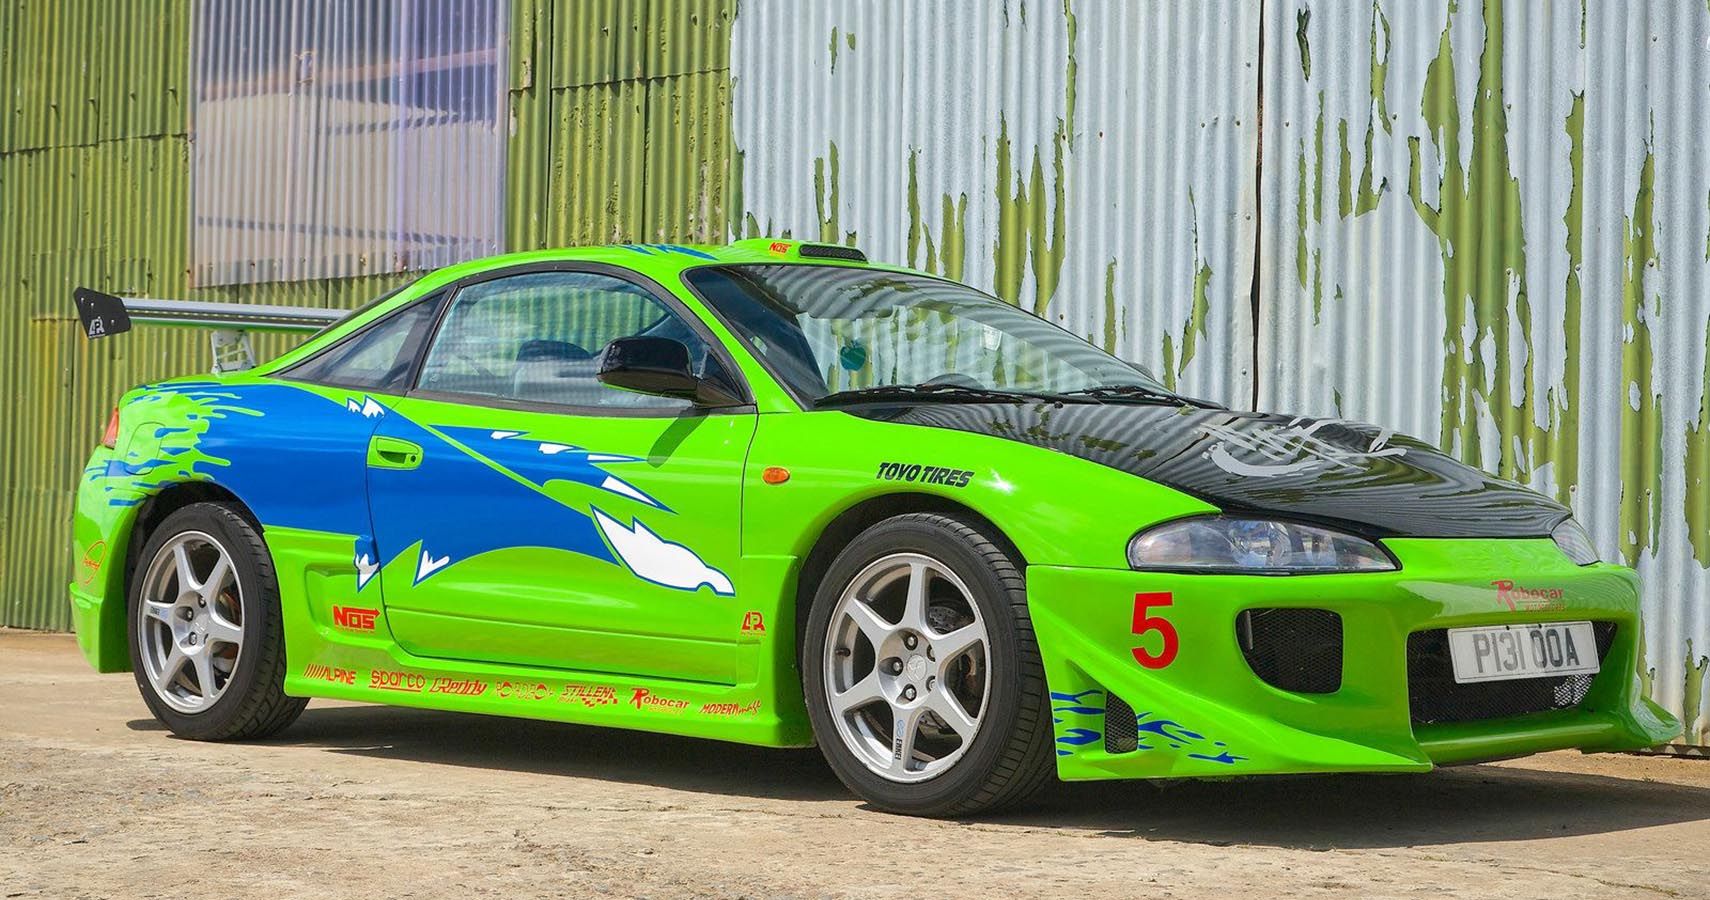 The Stunning Green 1995 Mitsubishi Eclipse Driven By Paul Walker in "The Fast And The Furious" Flick